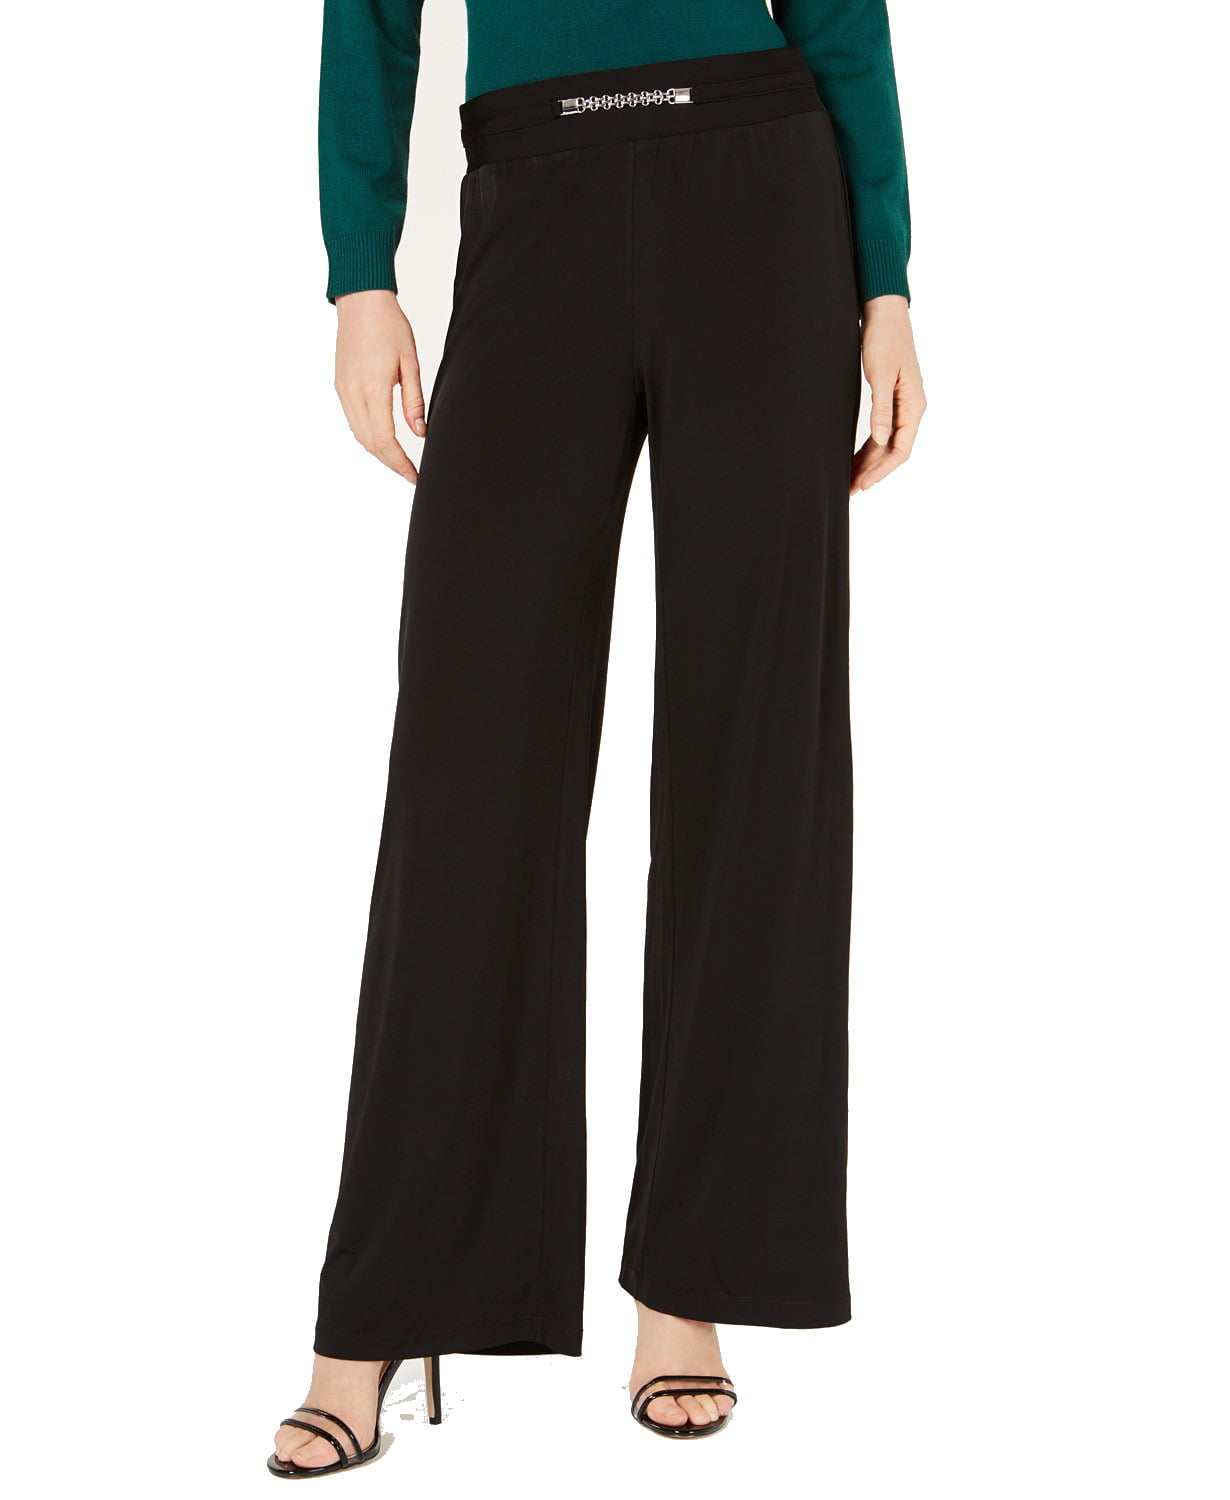 NY Collection - Black Women's Large Petite Pull-On Dress Pants $37 PL ...